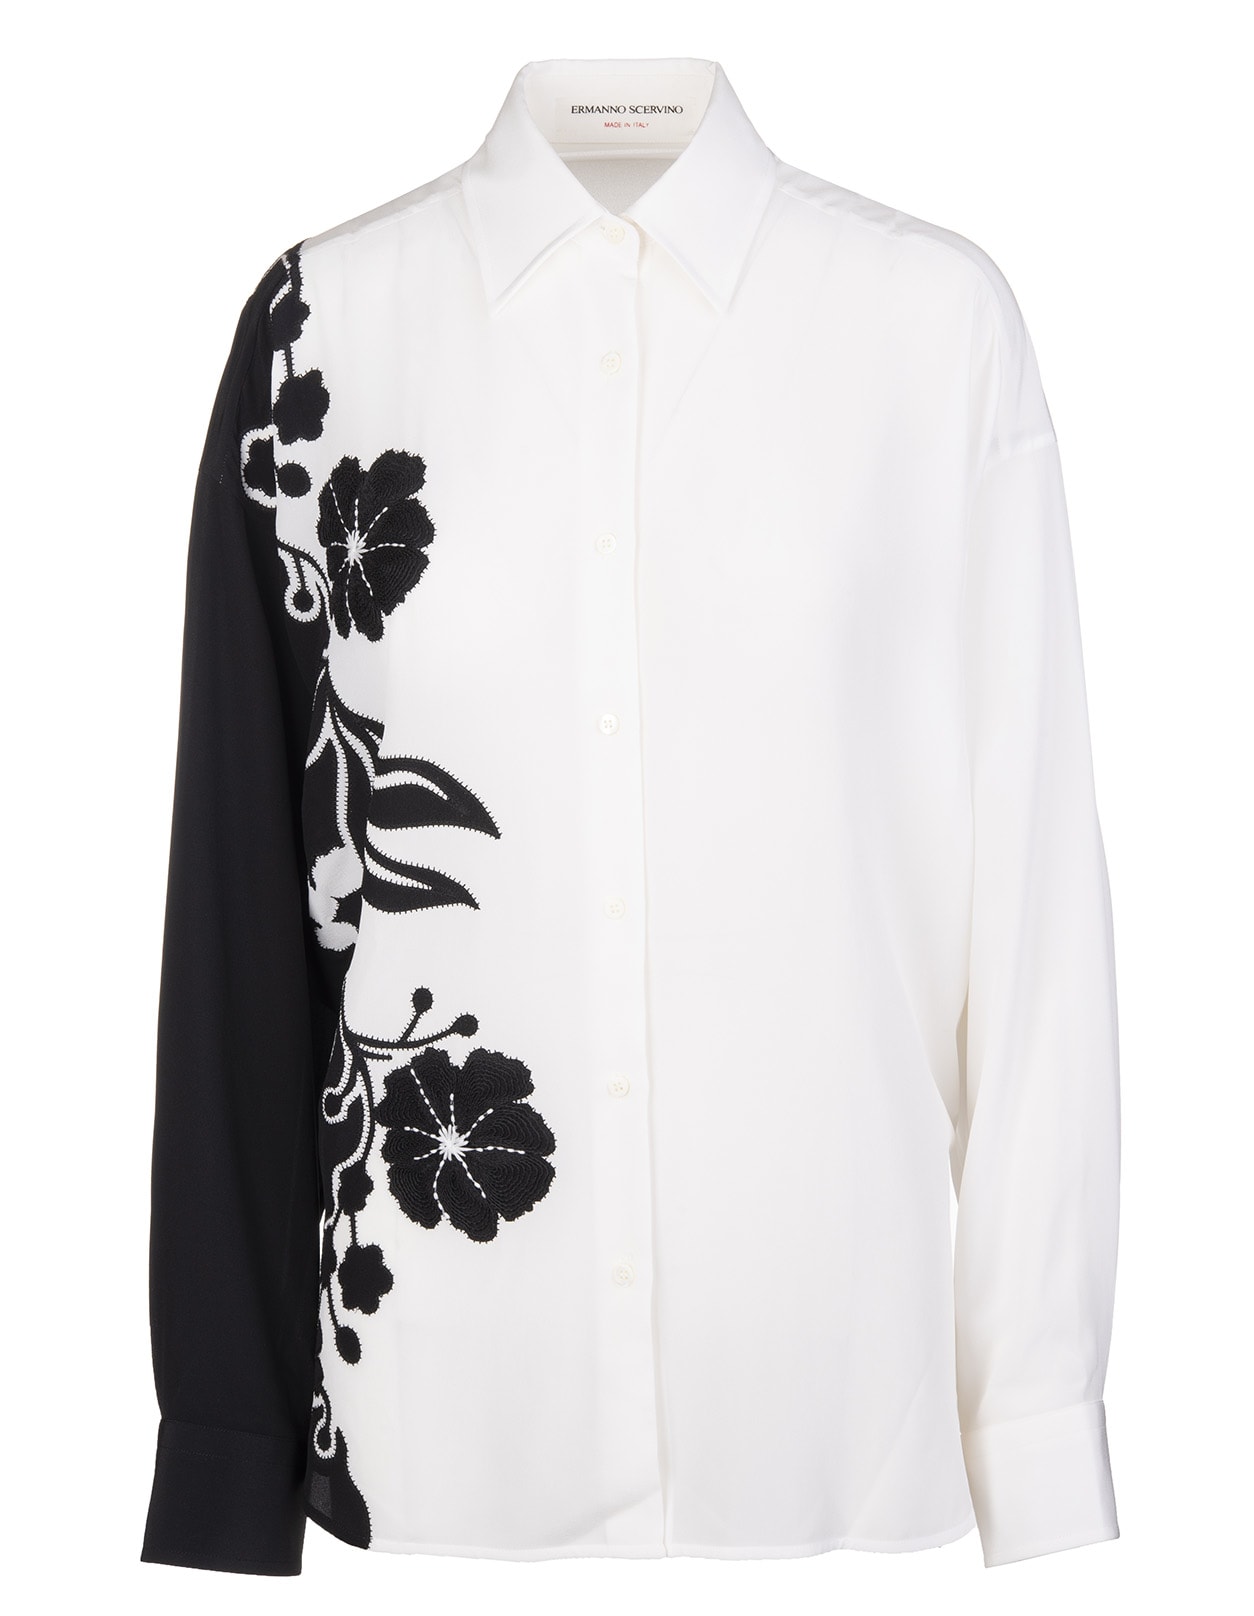 Ermanno Scervino White Silk Oversize Shirt With Embroidered Floral Inlays